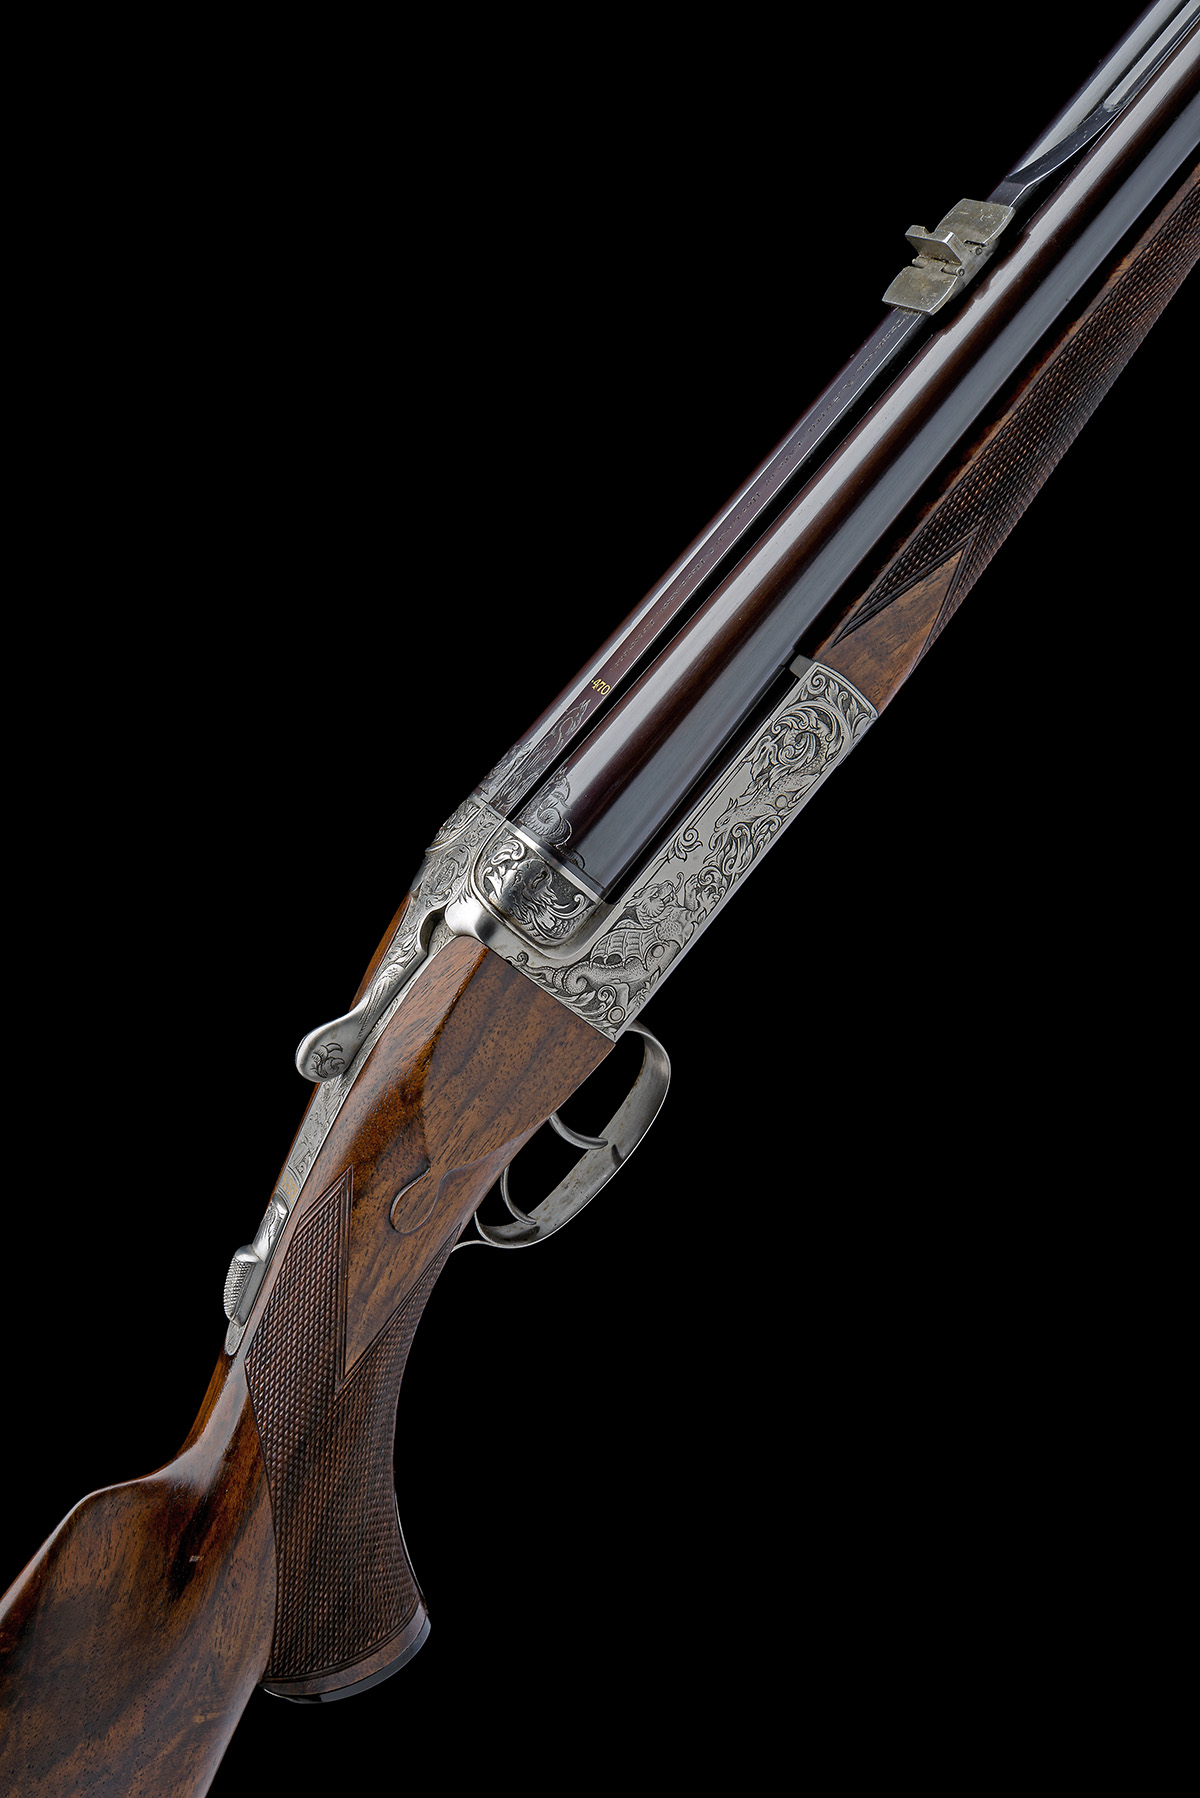 TERENCE A SMITH A VIRTUALLY COMPLETED .470 (FLANGED) NITRO EXPRESS BOXLOCK NON-EJECTOR DOUBLE RIFLE,